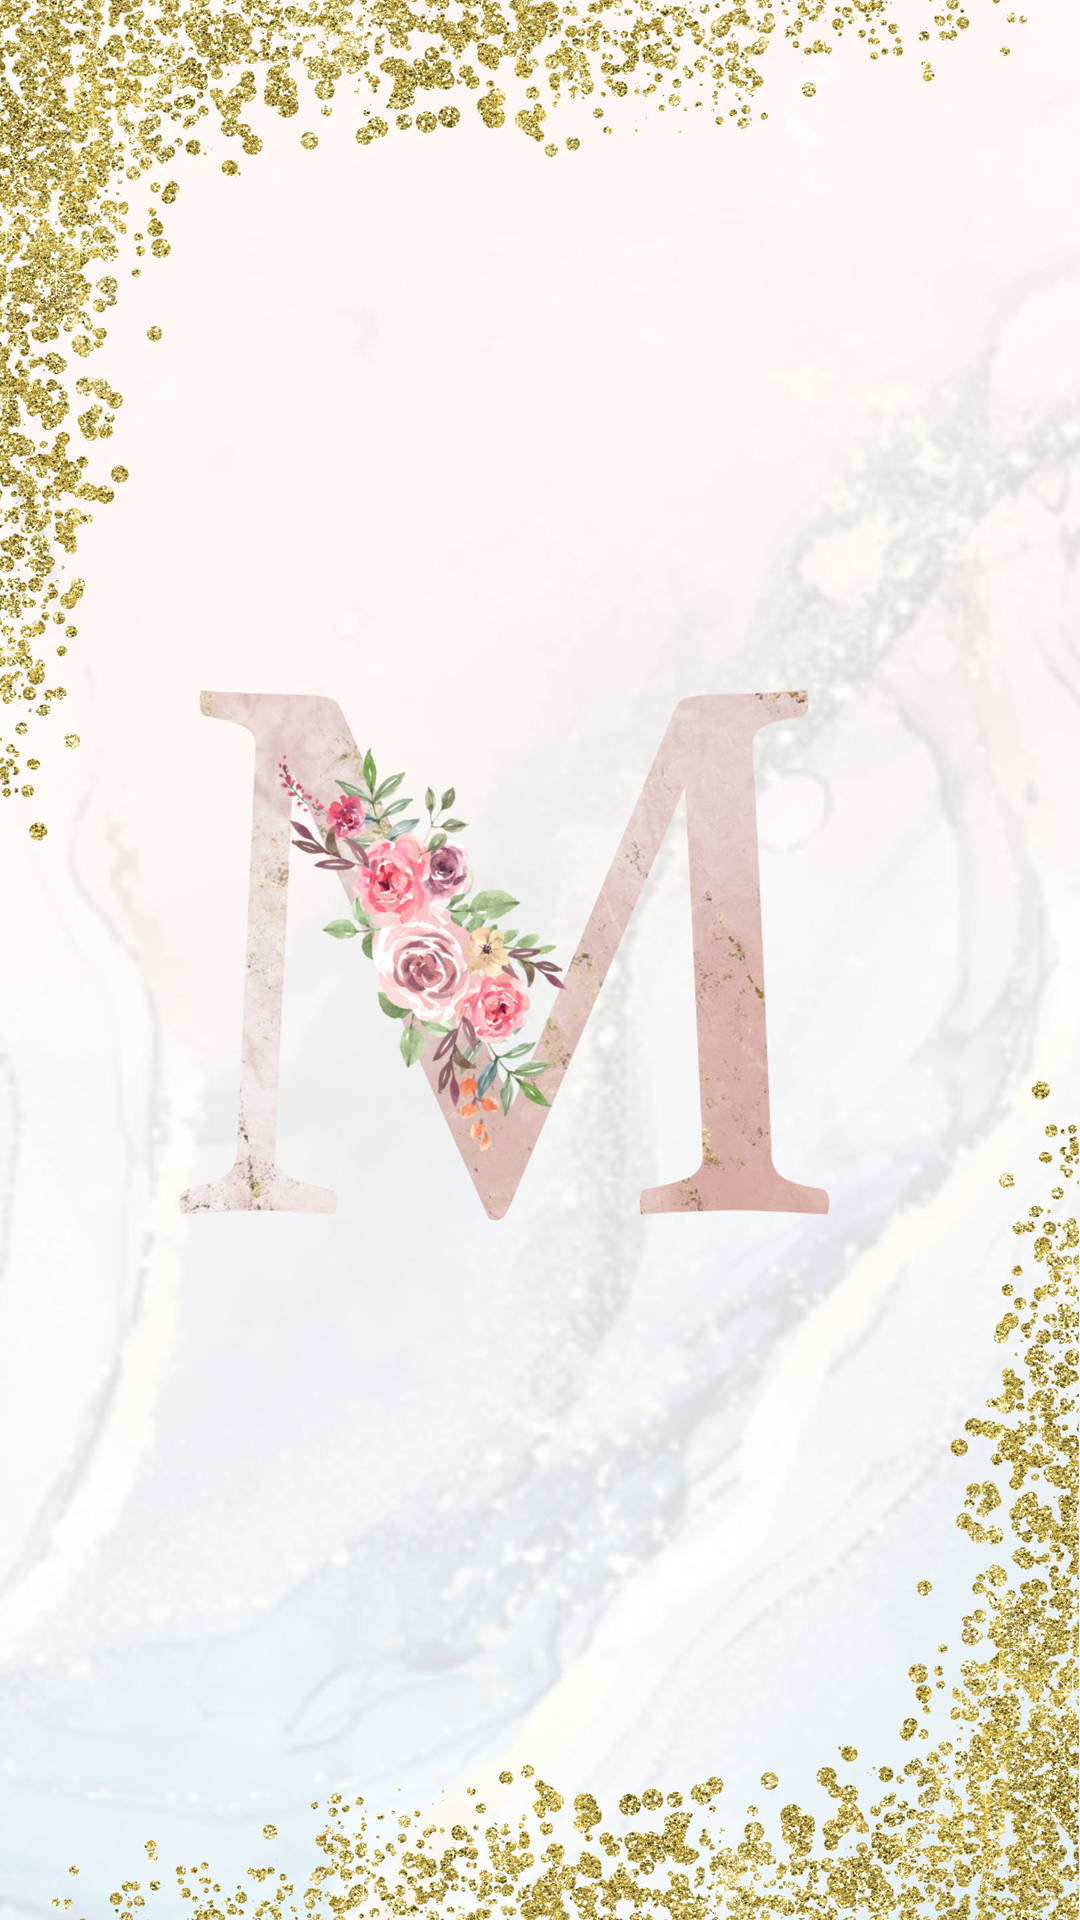 Free Letter M Wallpaper Downloads, [100+] Letter M Wallpapers for FREE |  